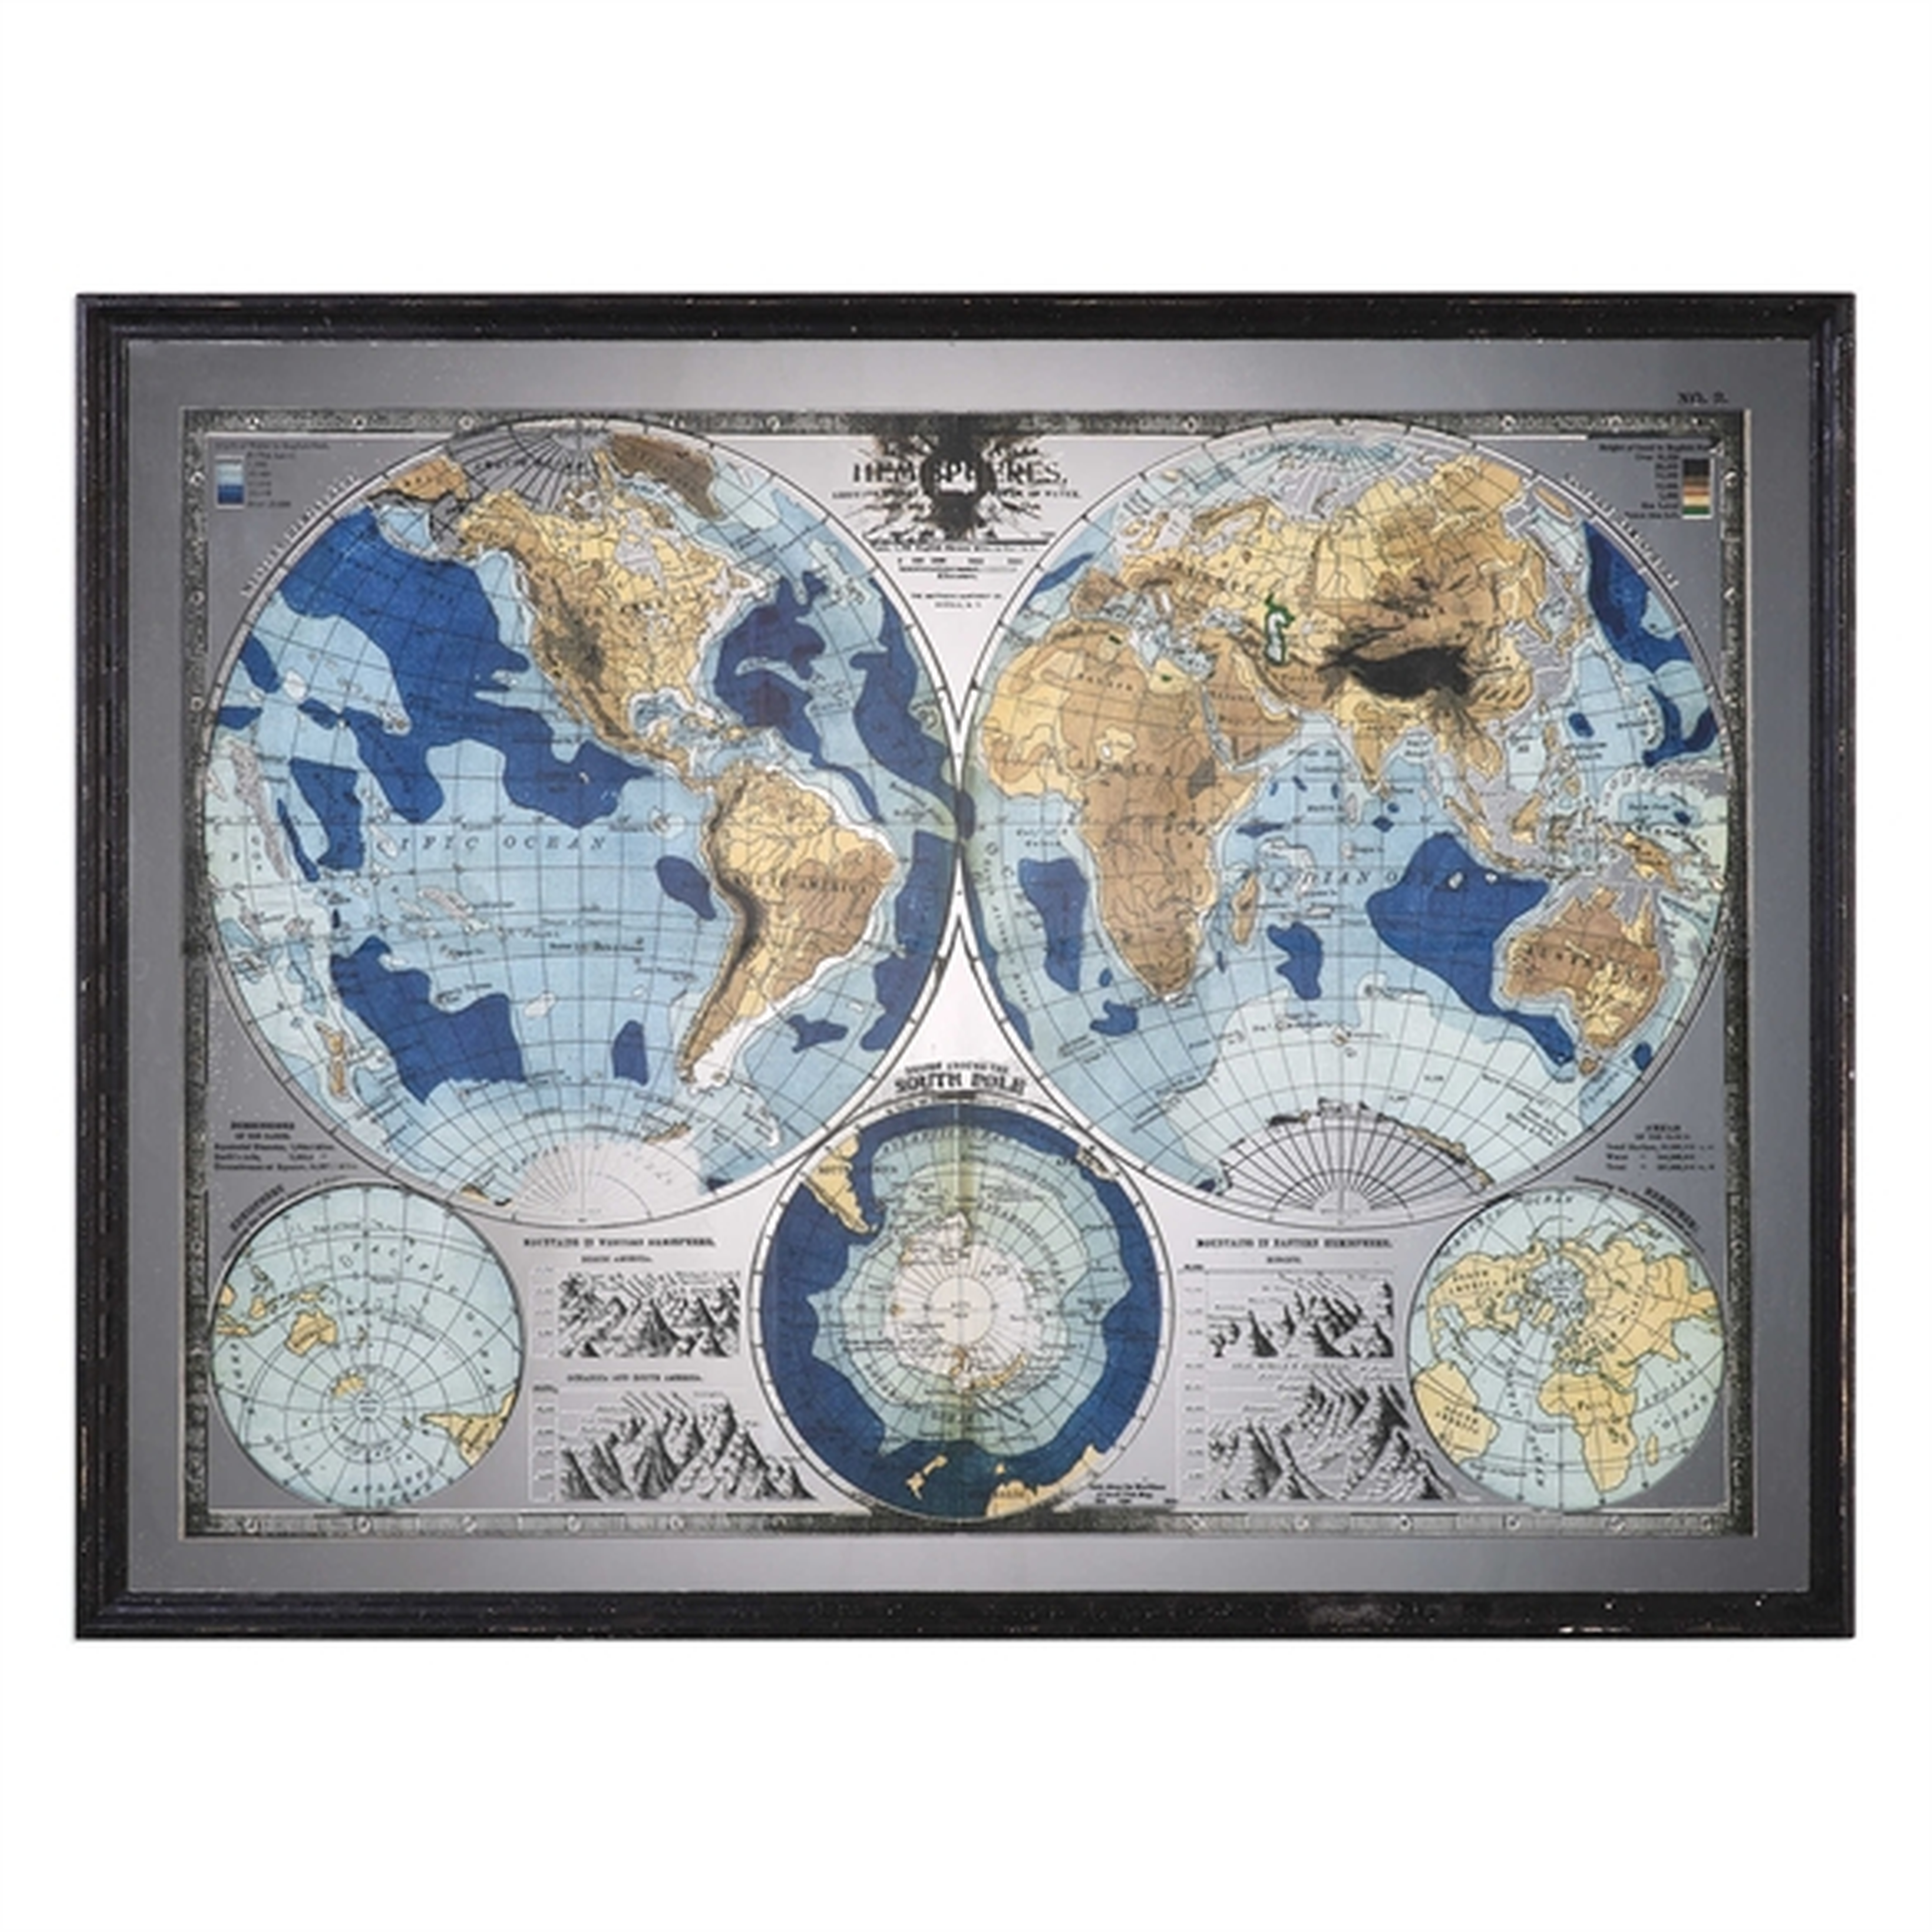 Mirrored World Map - Distressed black frame - Hudsonhill Foundry